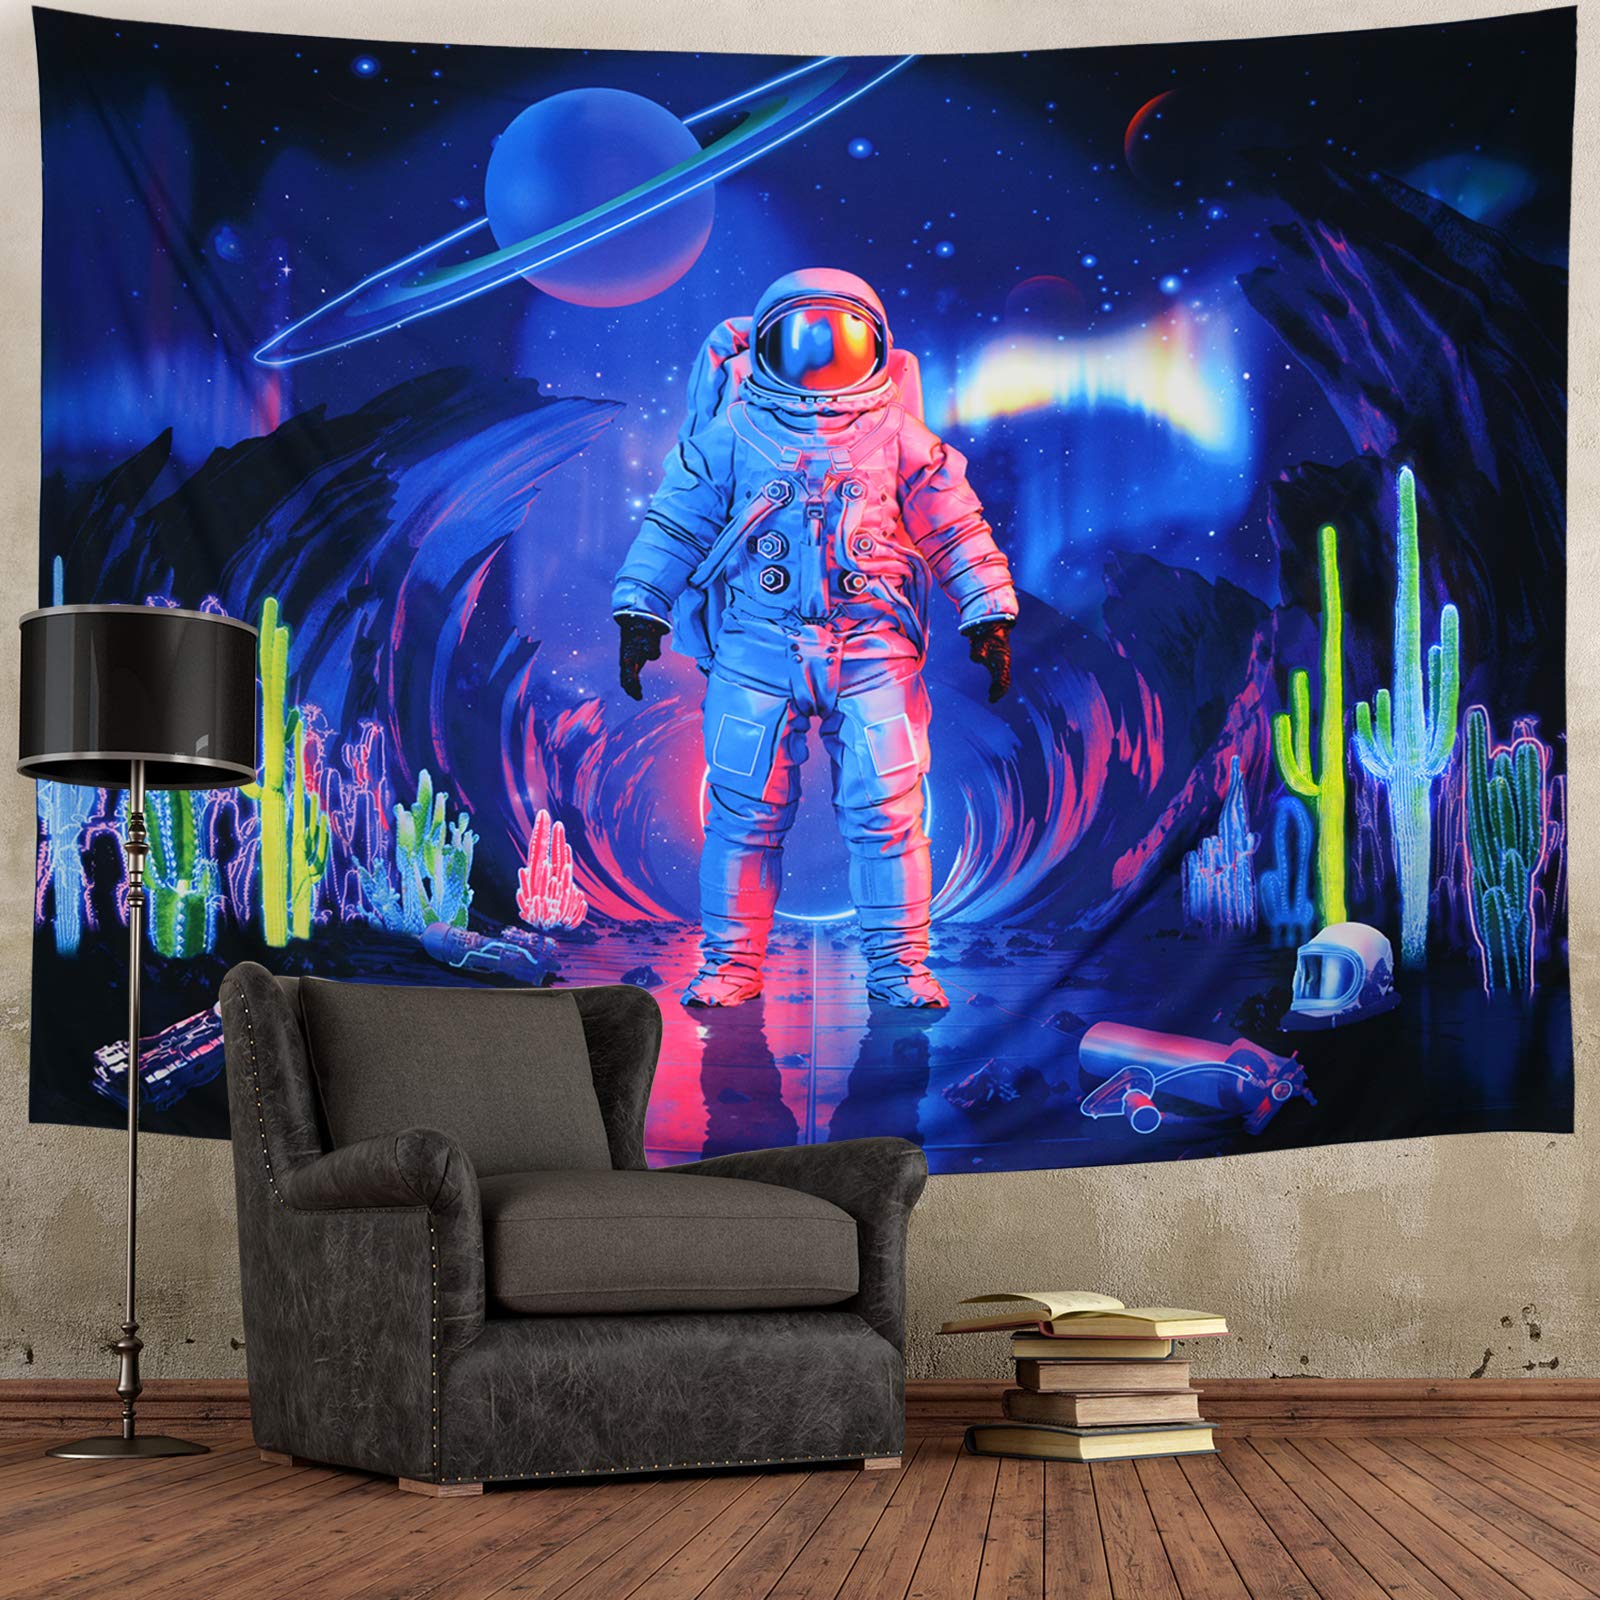 Beautiful Astronaut Tapestry To Hang In The Wall